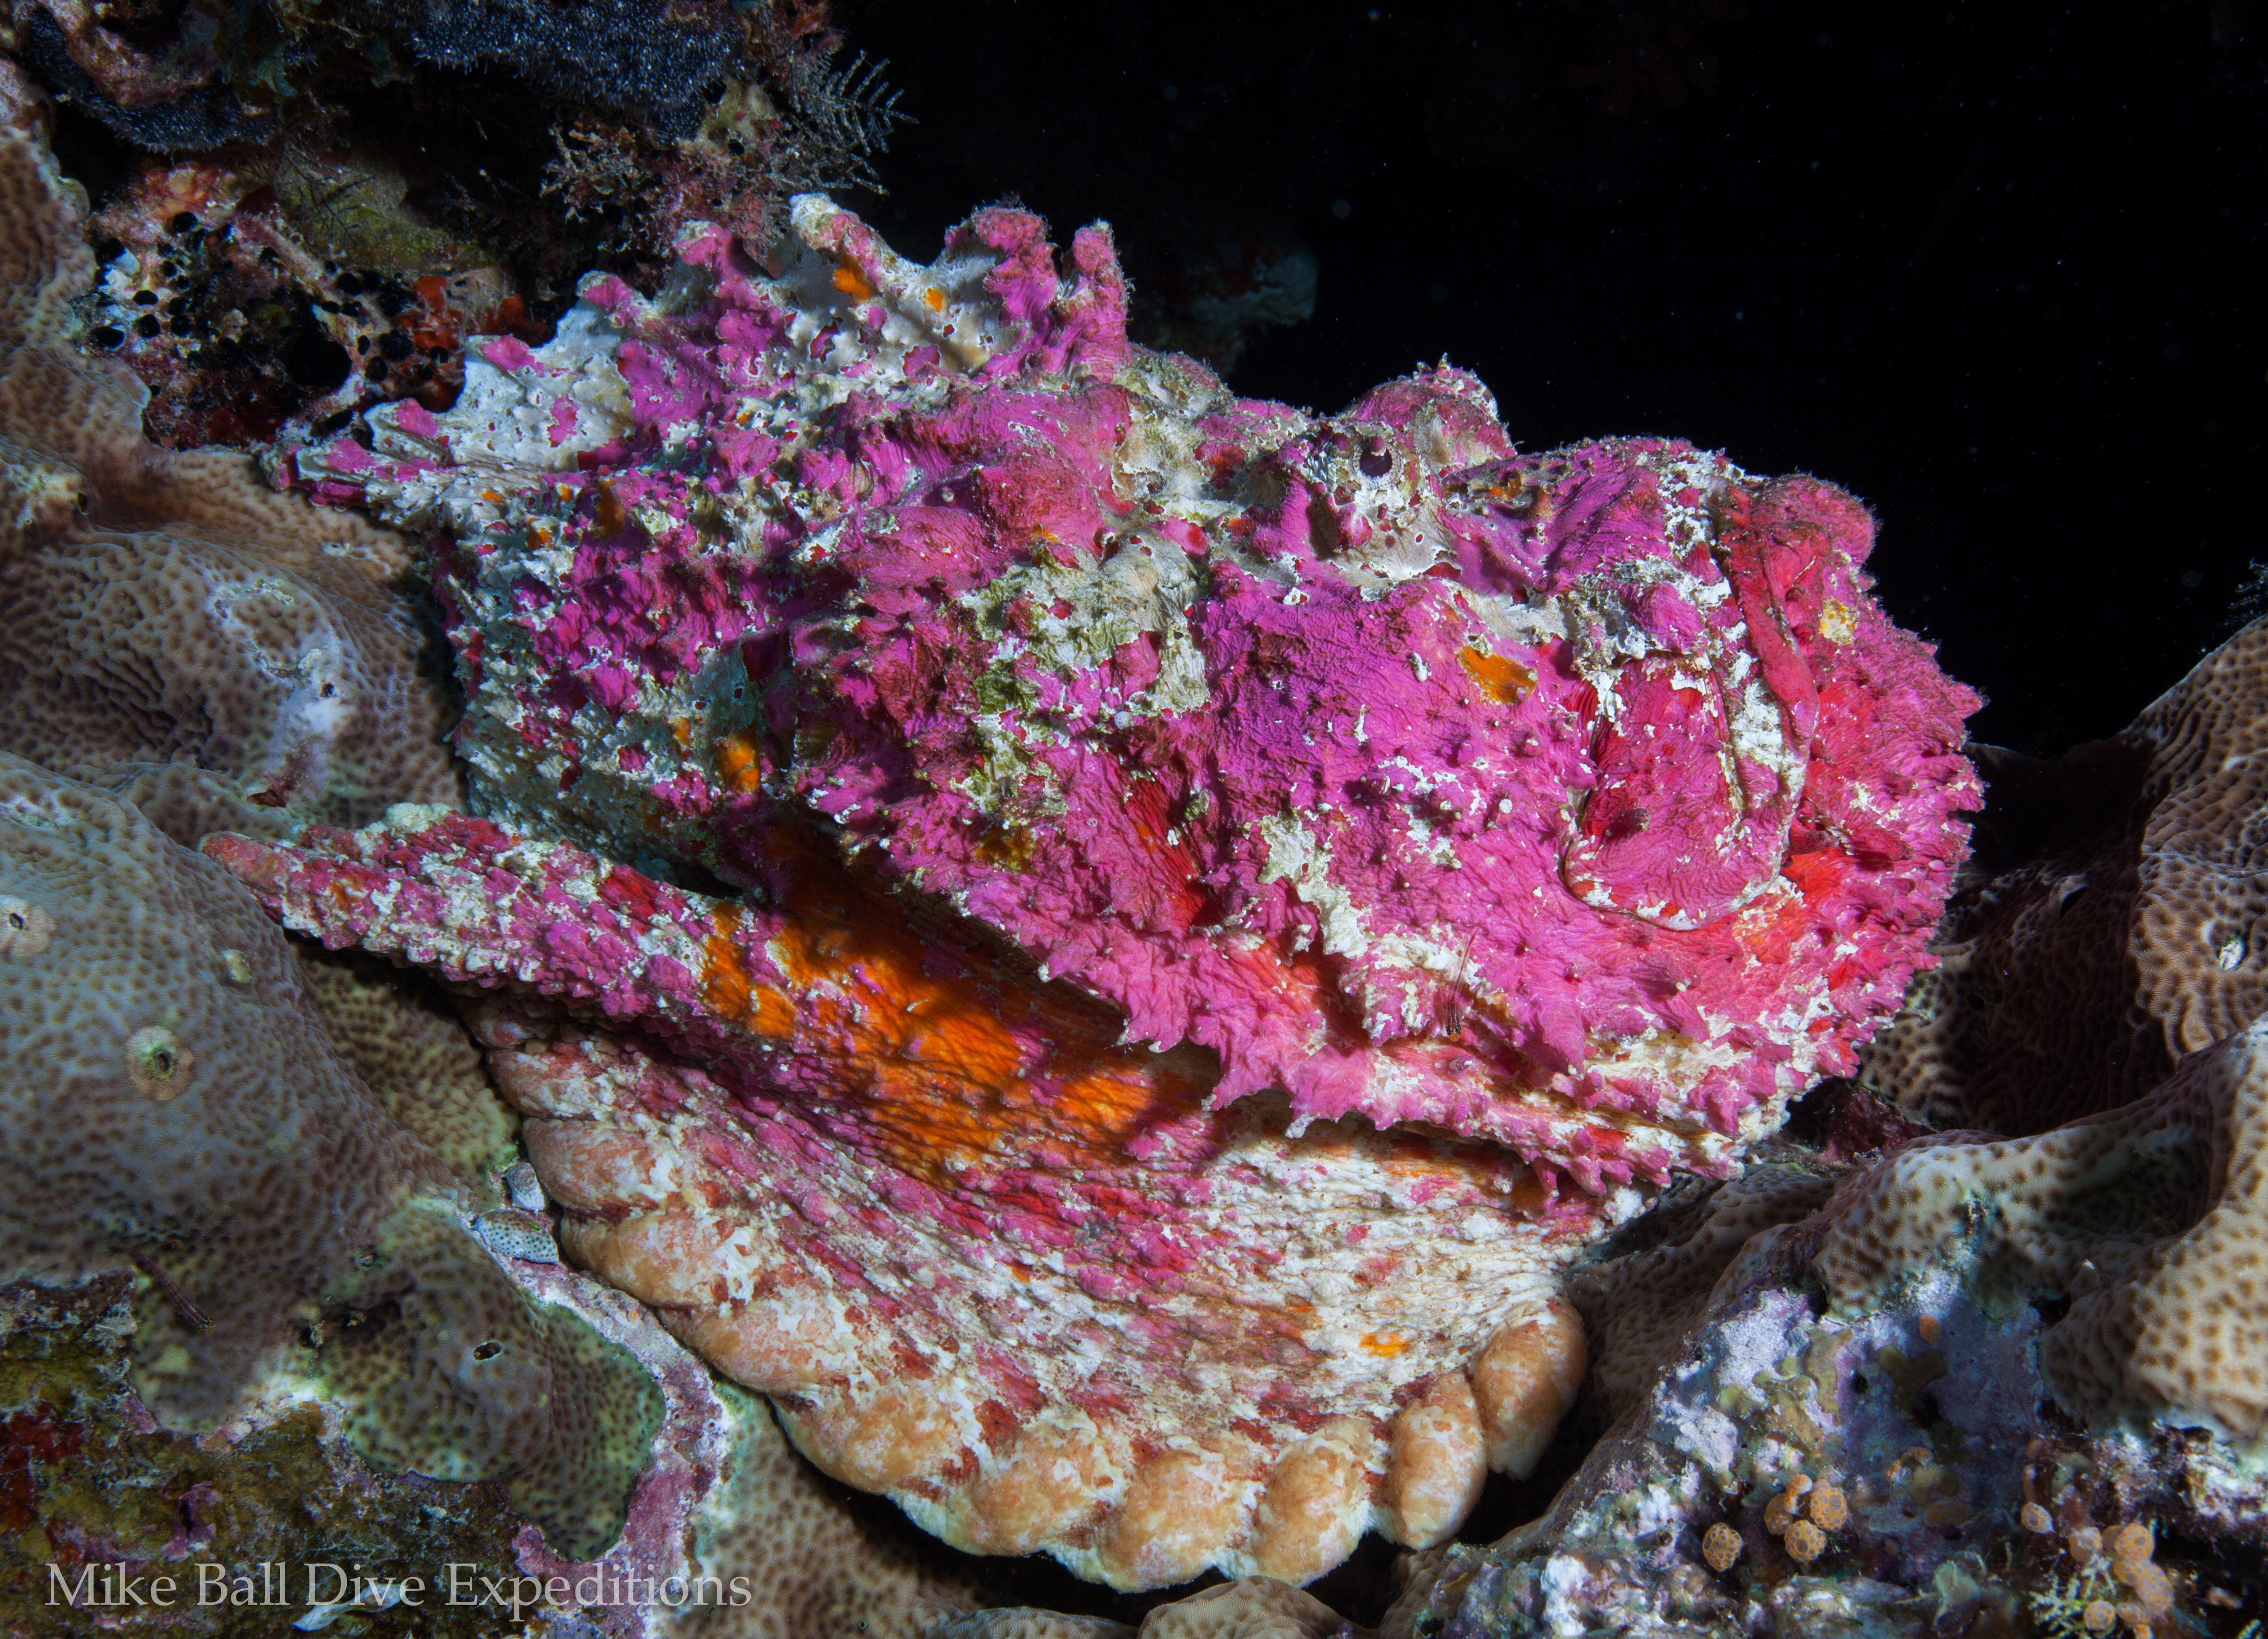 Stonefish at Steve's Bommie. Photo Courtesy of Mike Ball Dive Expeditions